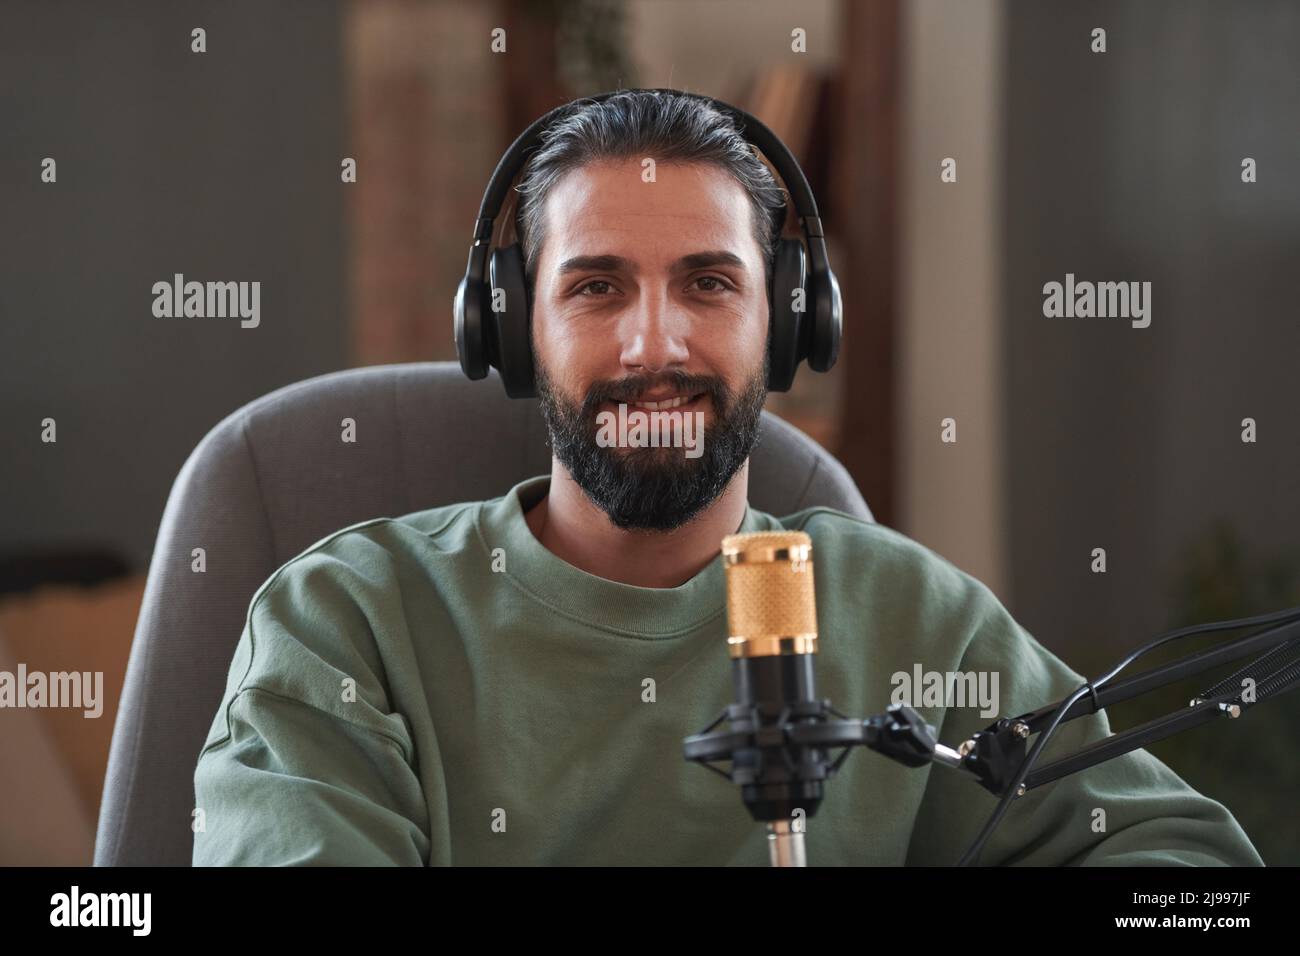 Medium close-up portrait of young Middle Eastern influencer wearing headphones creating content for blog looking at camera Stock Photo